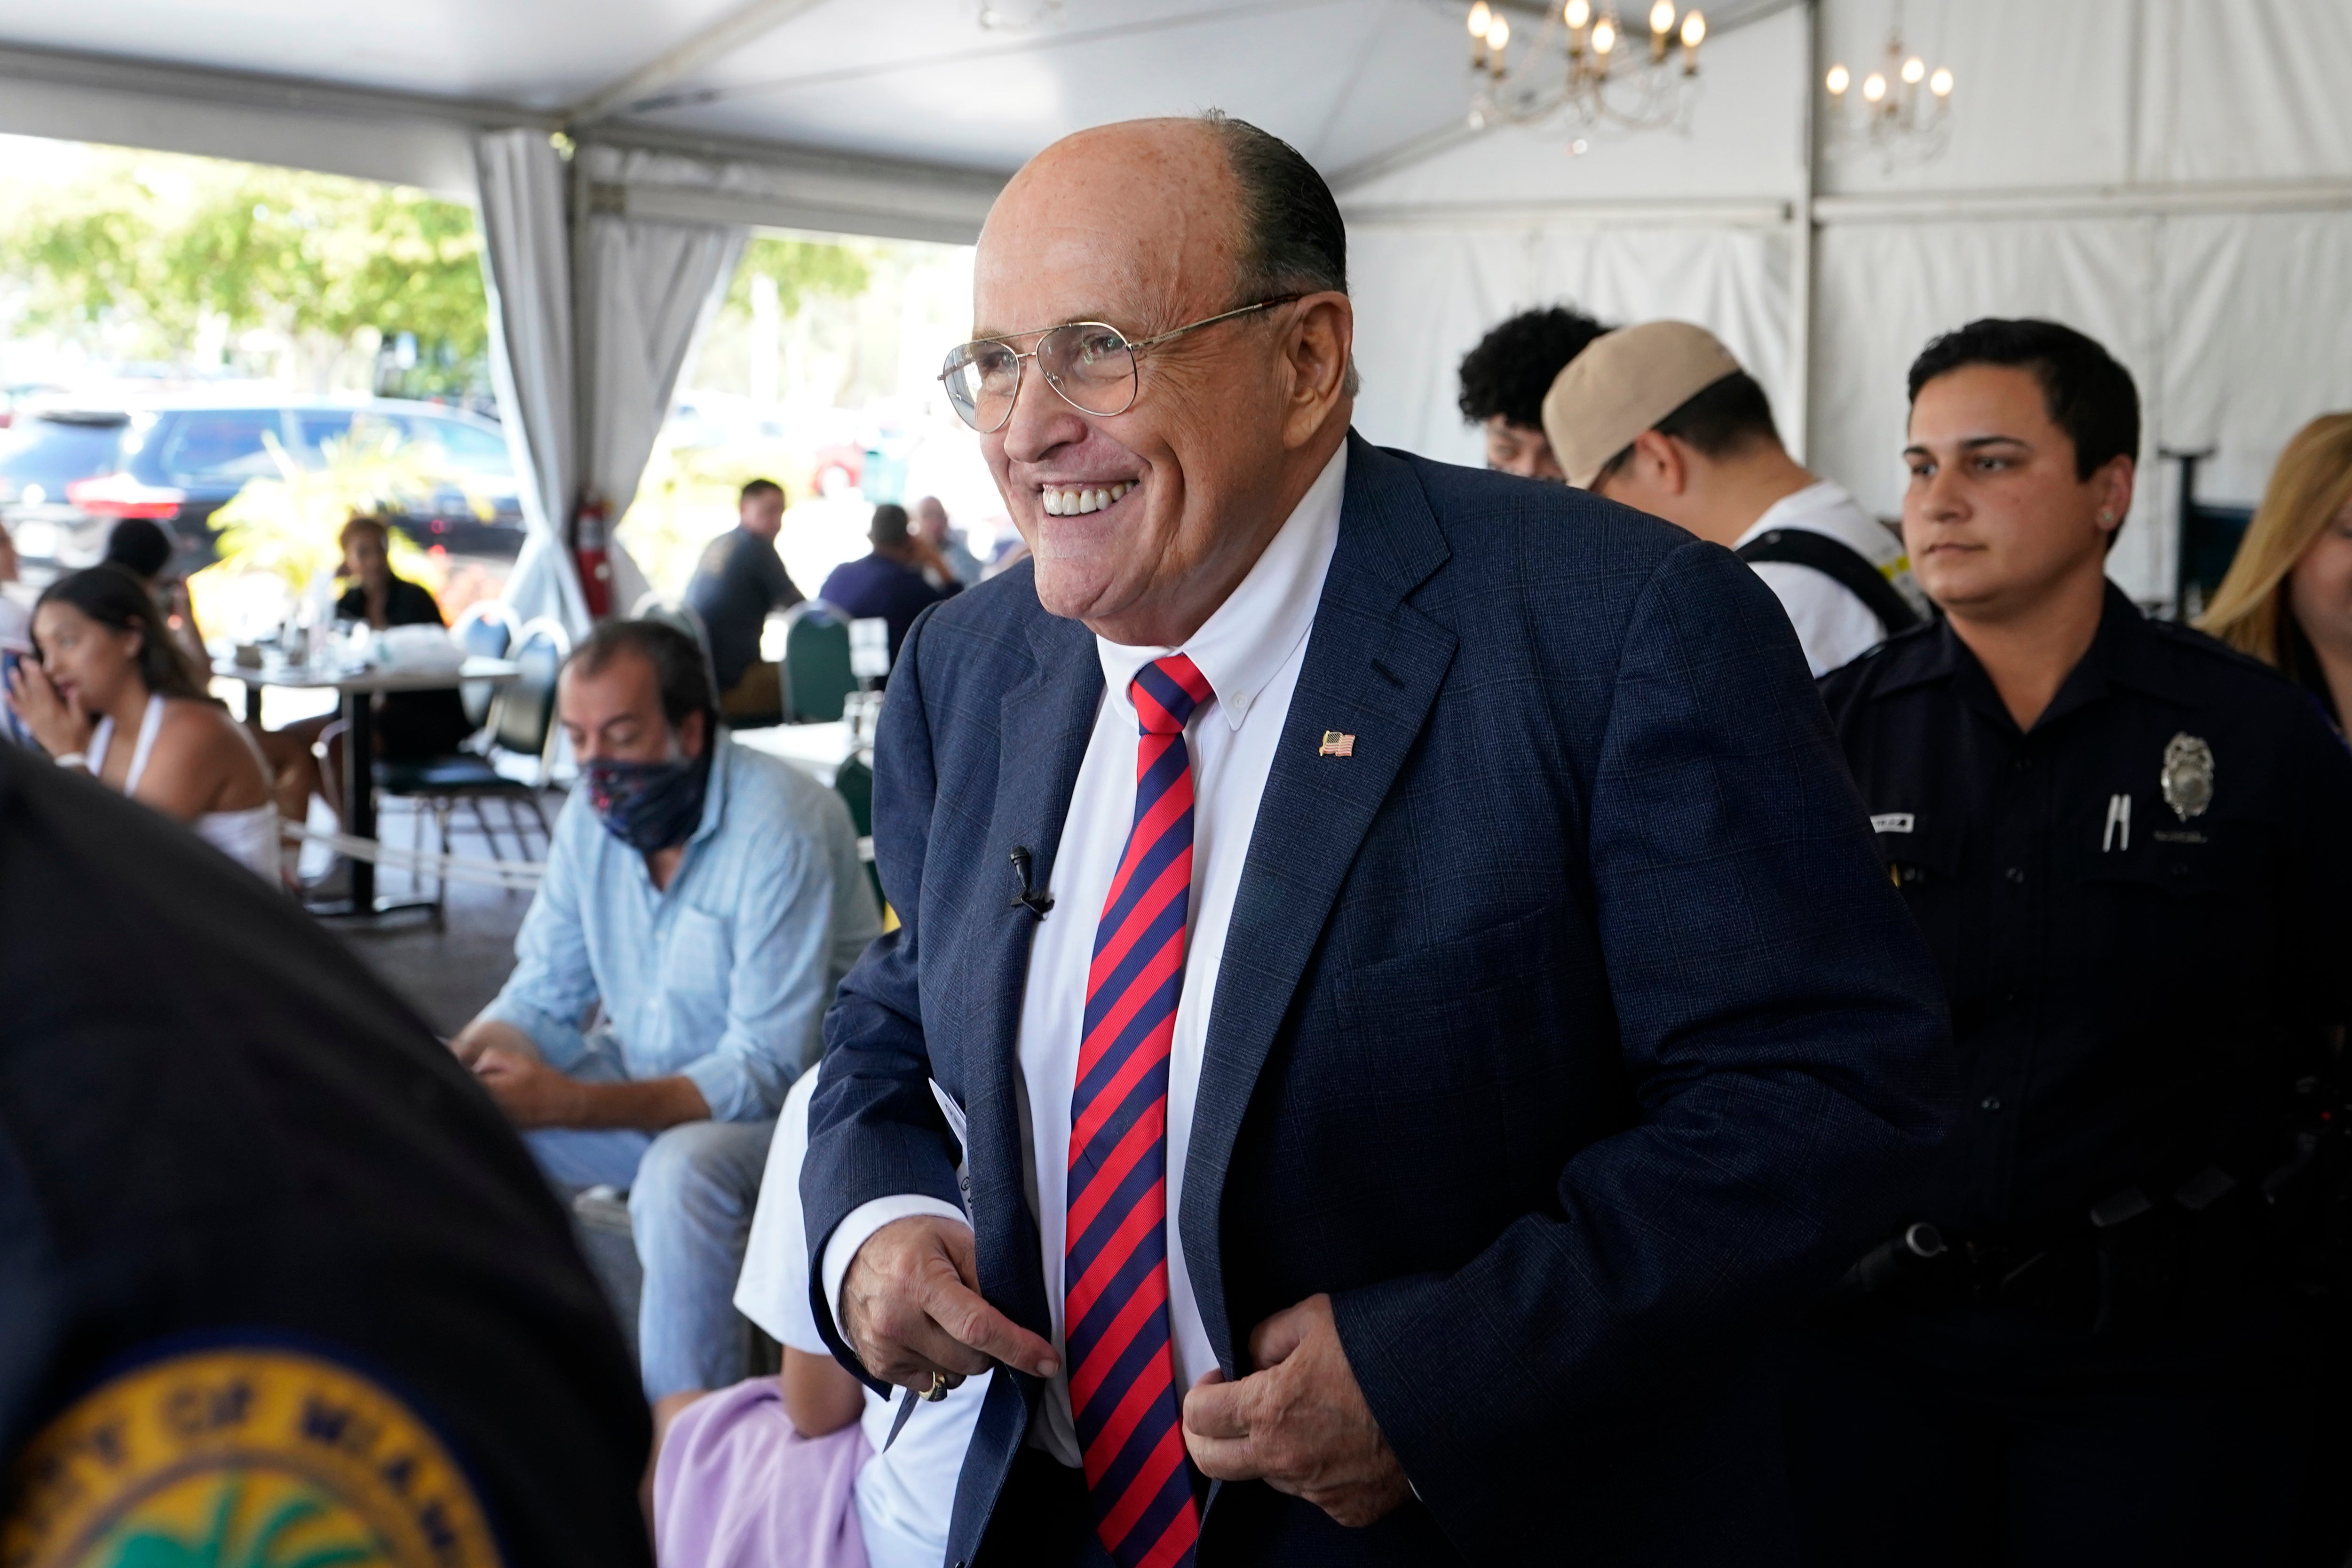 File image: Rudy Giuliani, who reportedly hasn’t his dues from Trump, praised the former president once again as he speaks in support of his son Andrew Giuliani in the New York GOP fundraiser